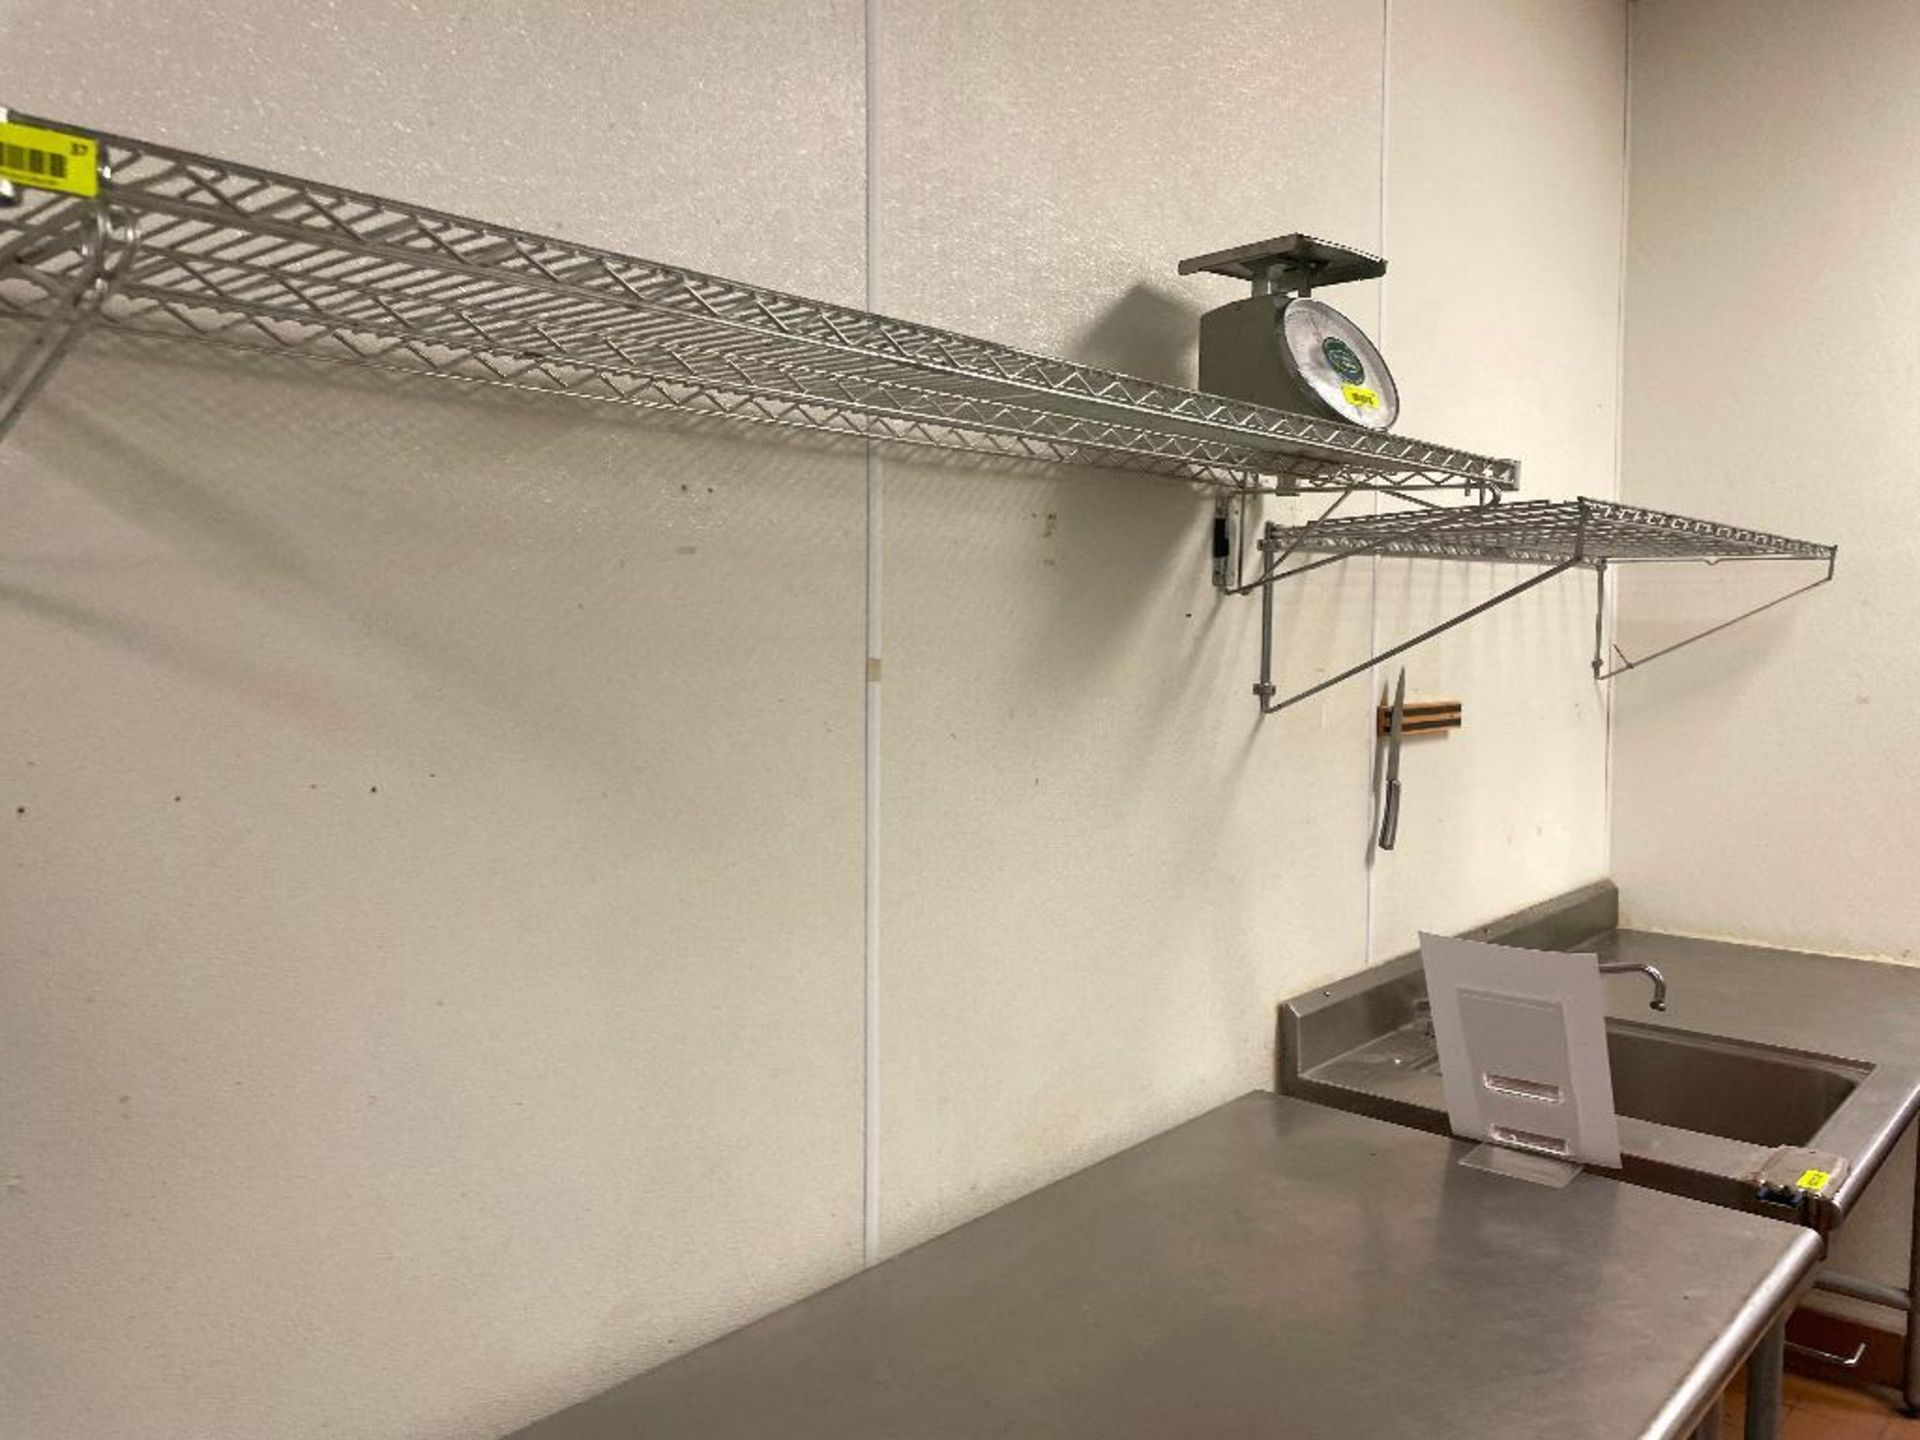 DESCRIPTION: (2) 48" X 18" WALL MOUNTED WIRE SHELVES. LOCATION: ALLEN TX QTY: 1 - Image 2 of 2